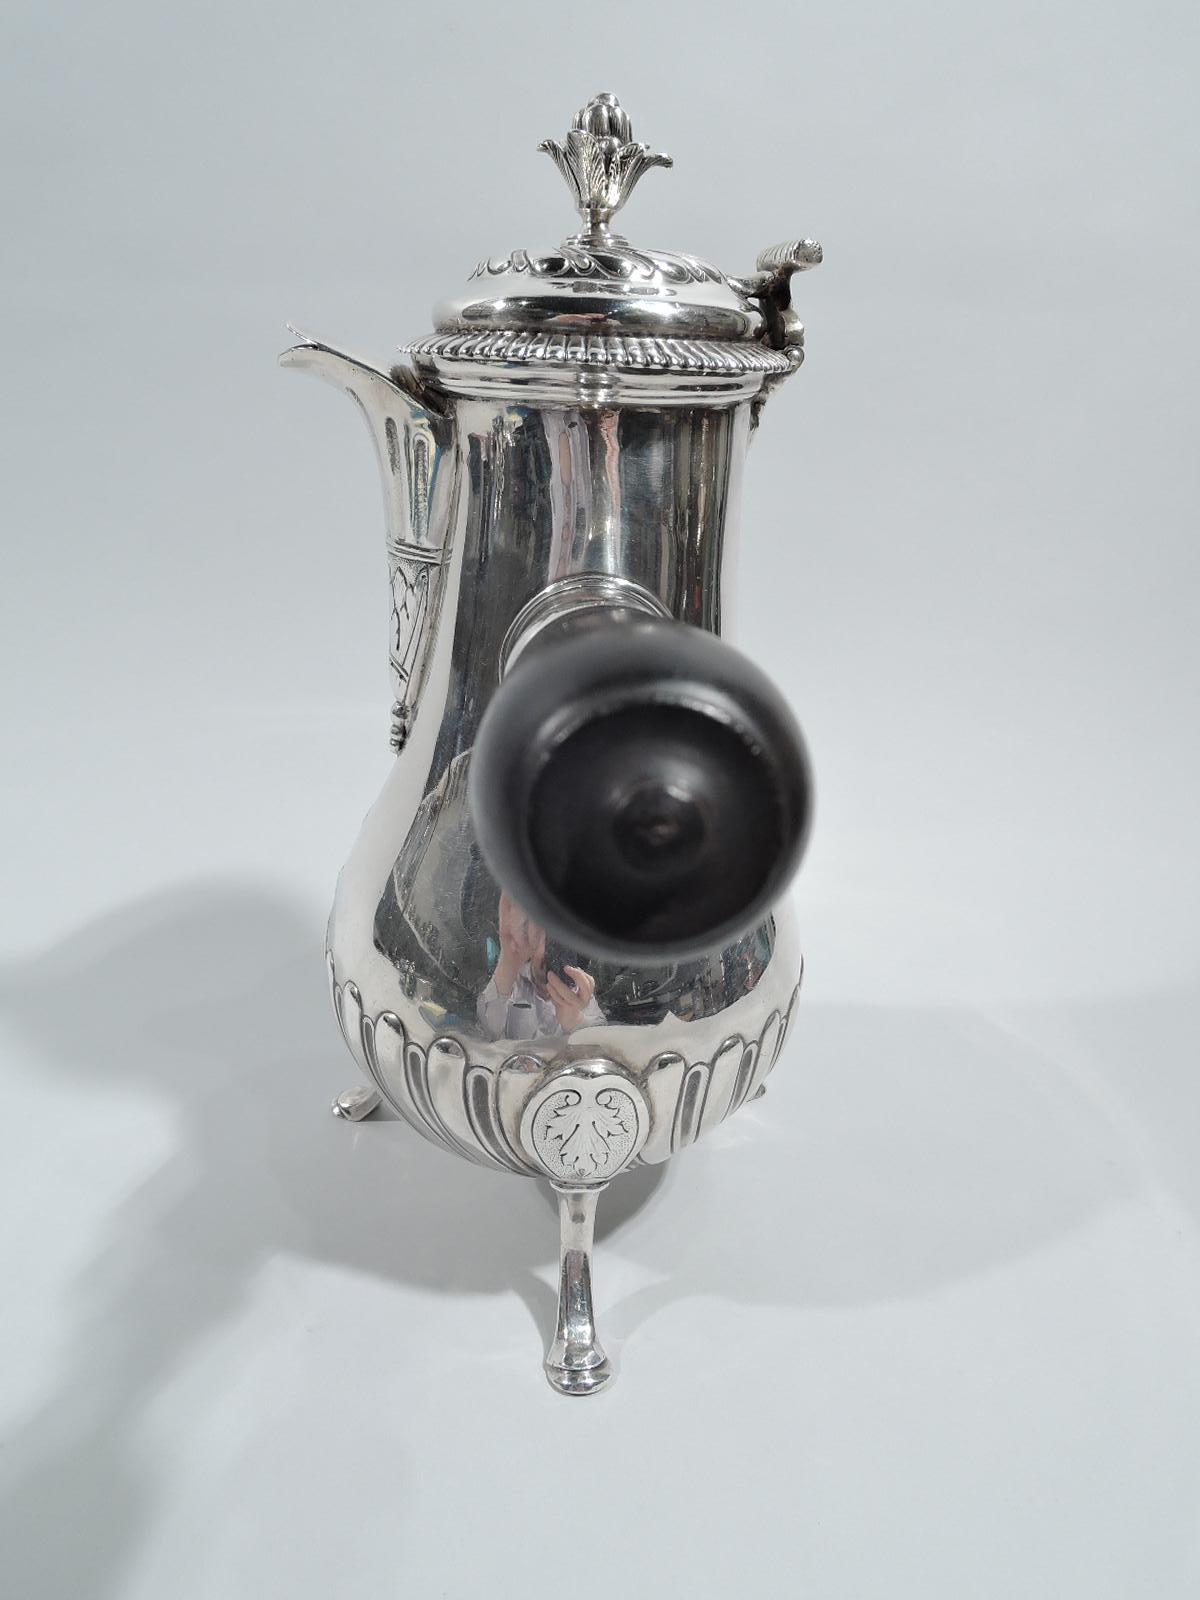 French Classical silver coffeepot, 18th century. Baluster with silver-mounted stained and turned wood handle. Cover hinged with bud finial. V-form fish-mouth spout. Three hoof supports with oval medallion mounts. Gadrooning, twisted fluting, and